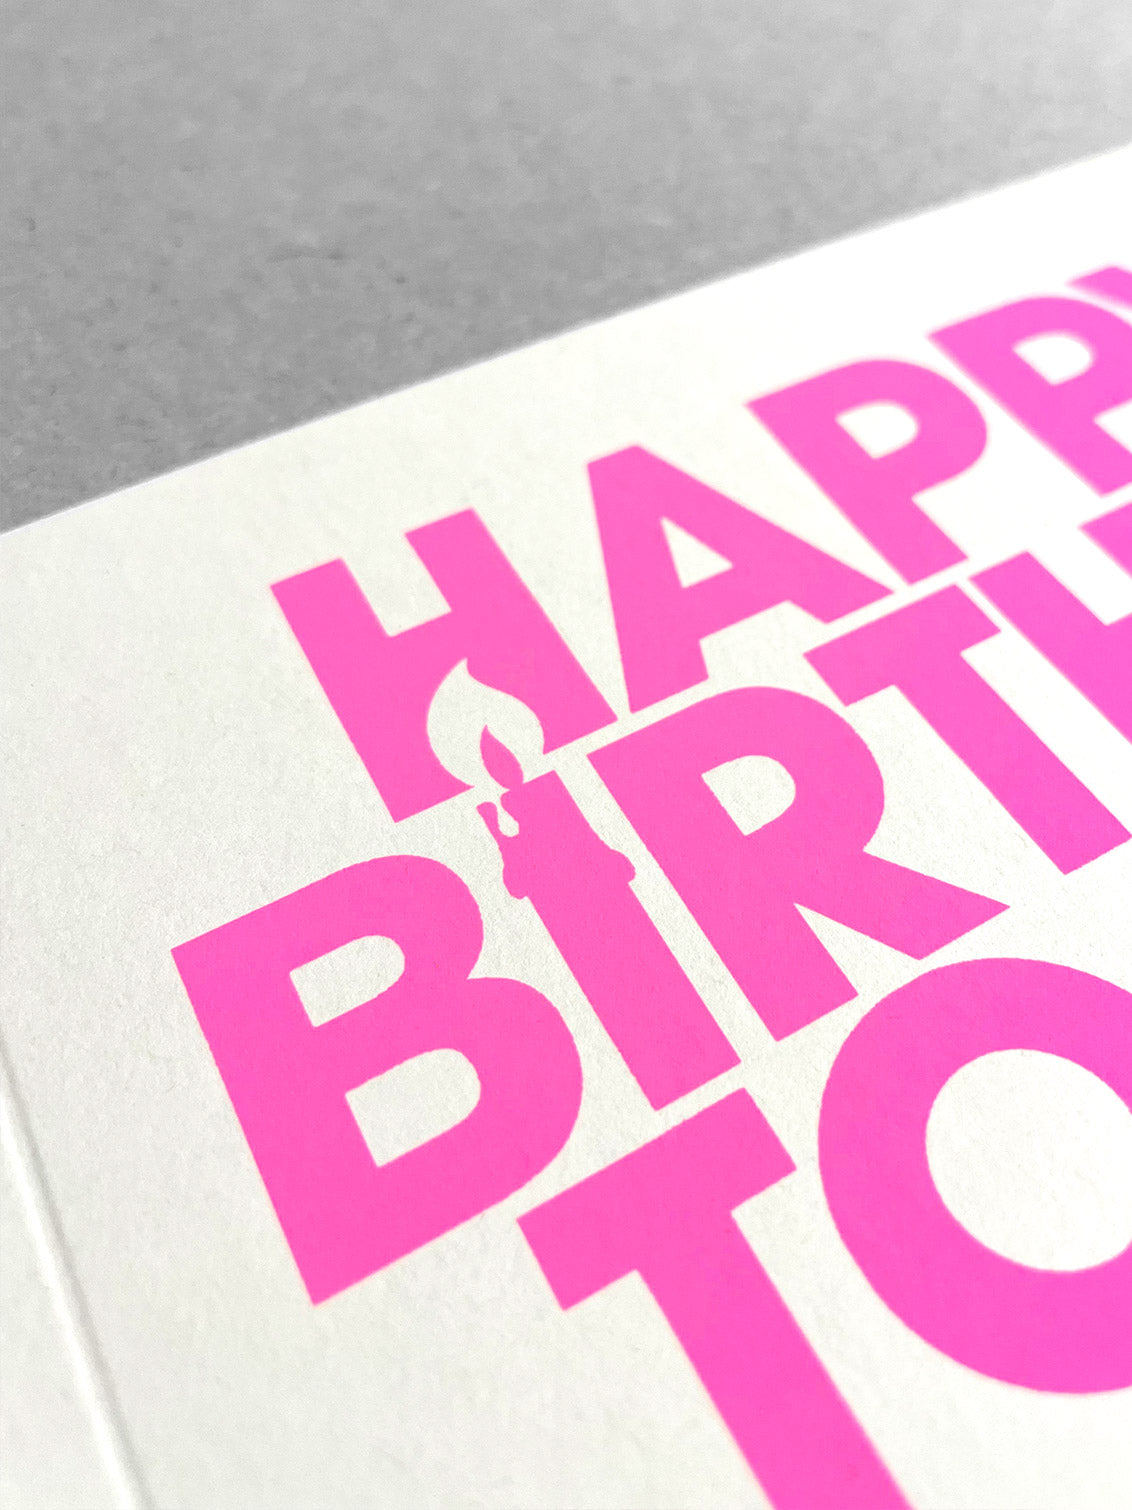 Salty’s Online 
Happy birthday to you card - Neon pink